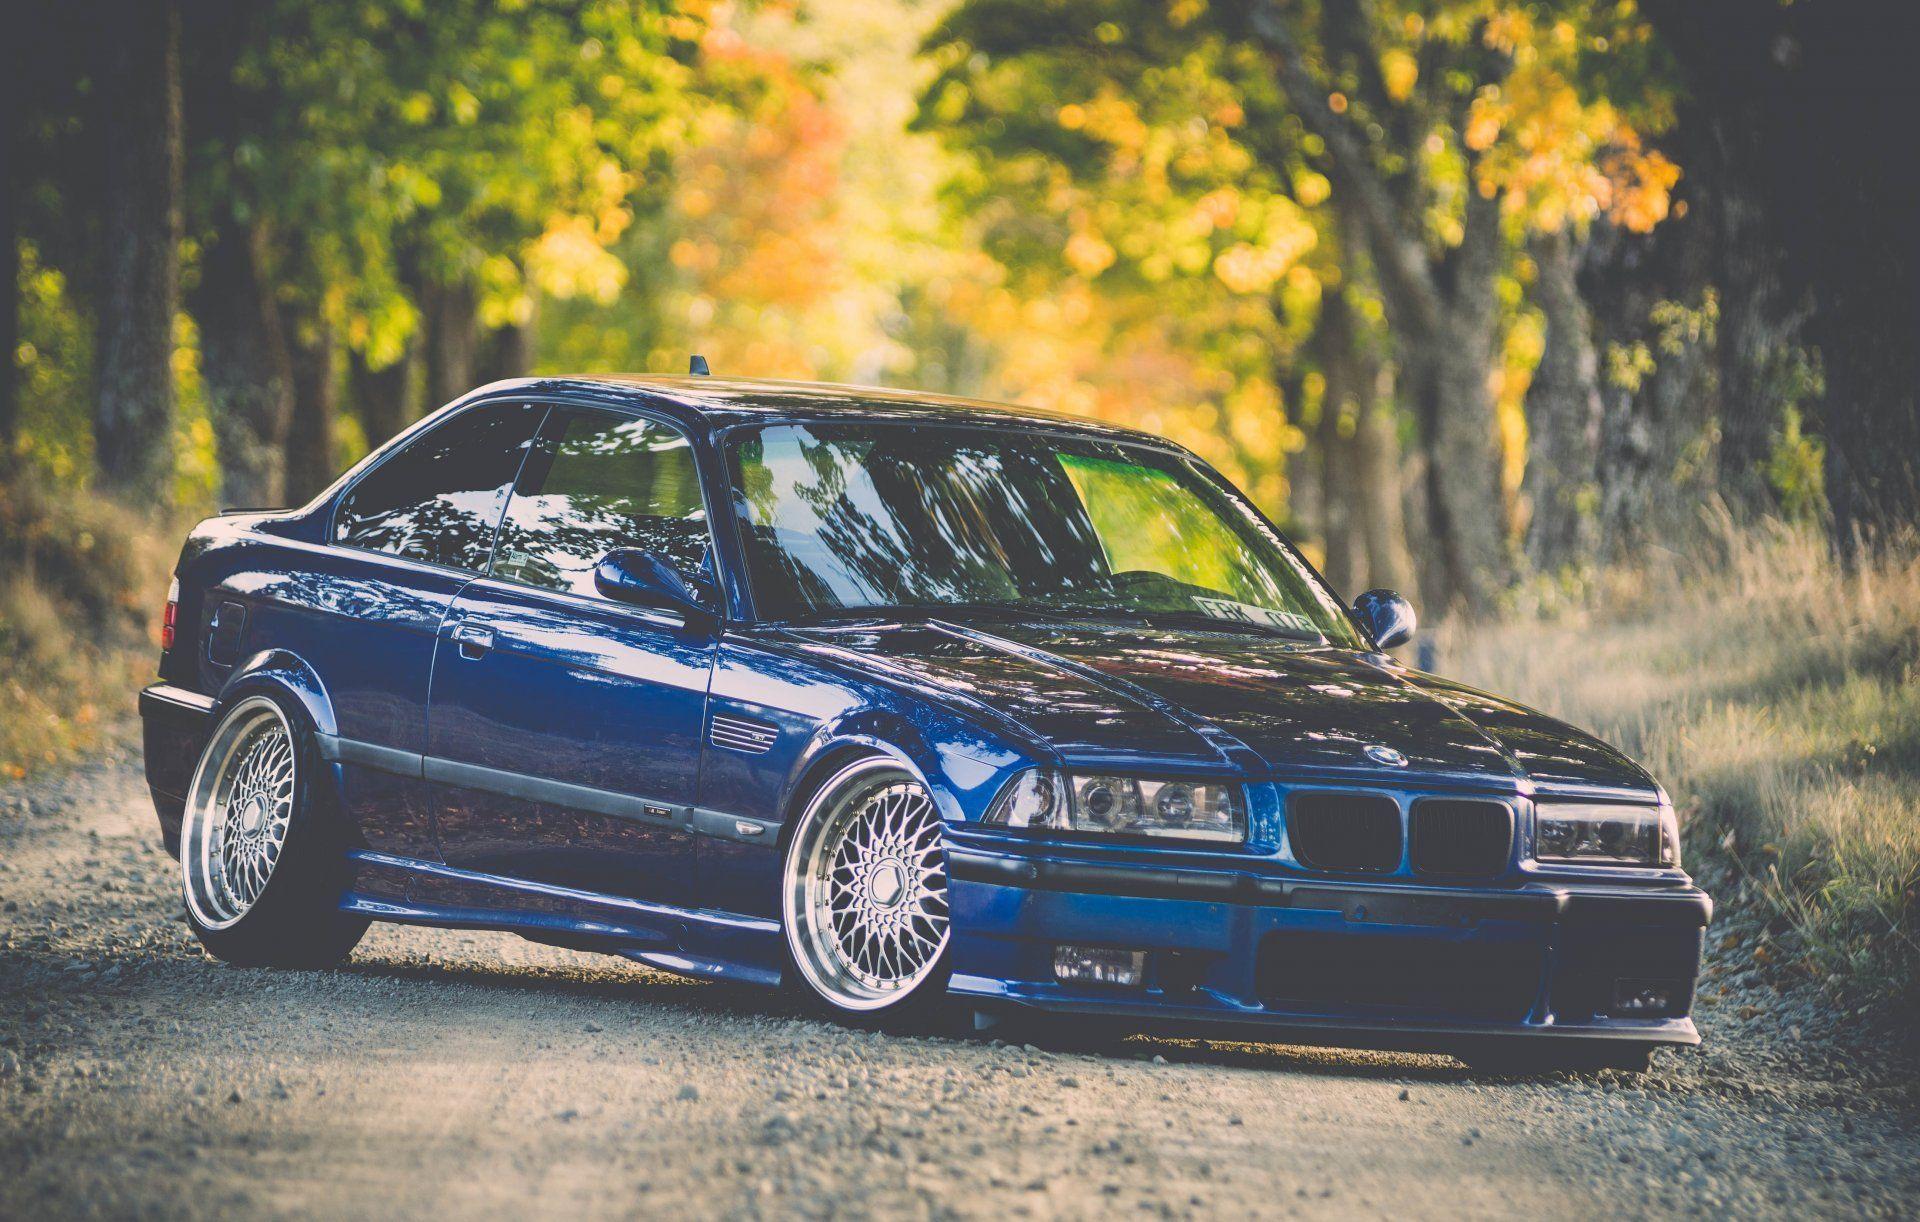 Bmw E36 M3 Wallpapers Top Free Bmw E36 M3 Backgrounds Wallpaperaccess